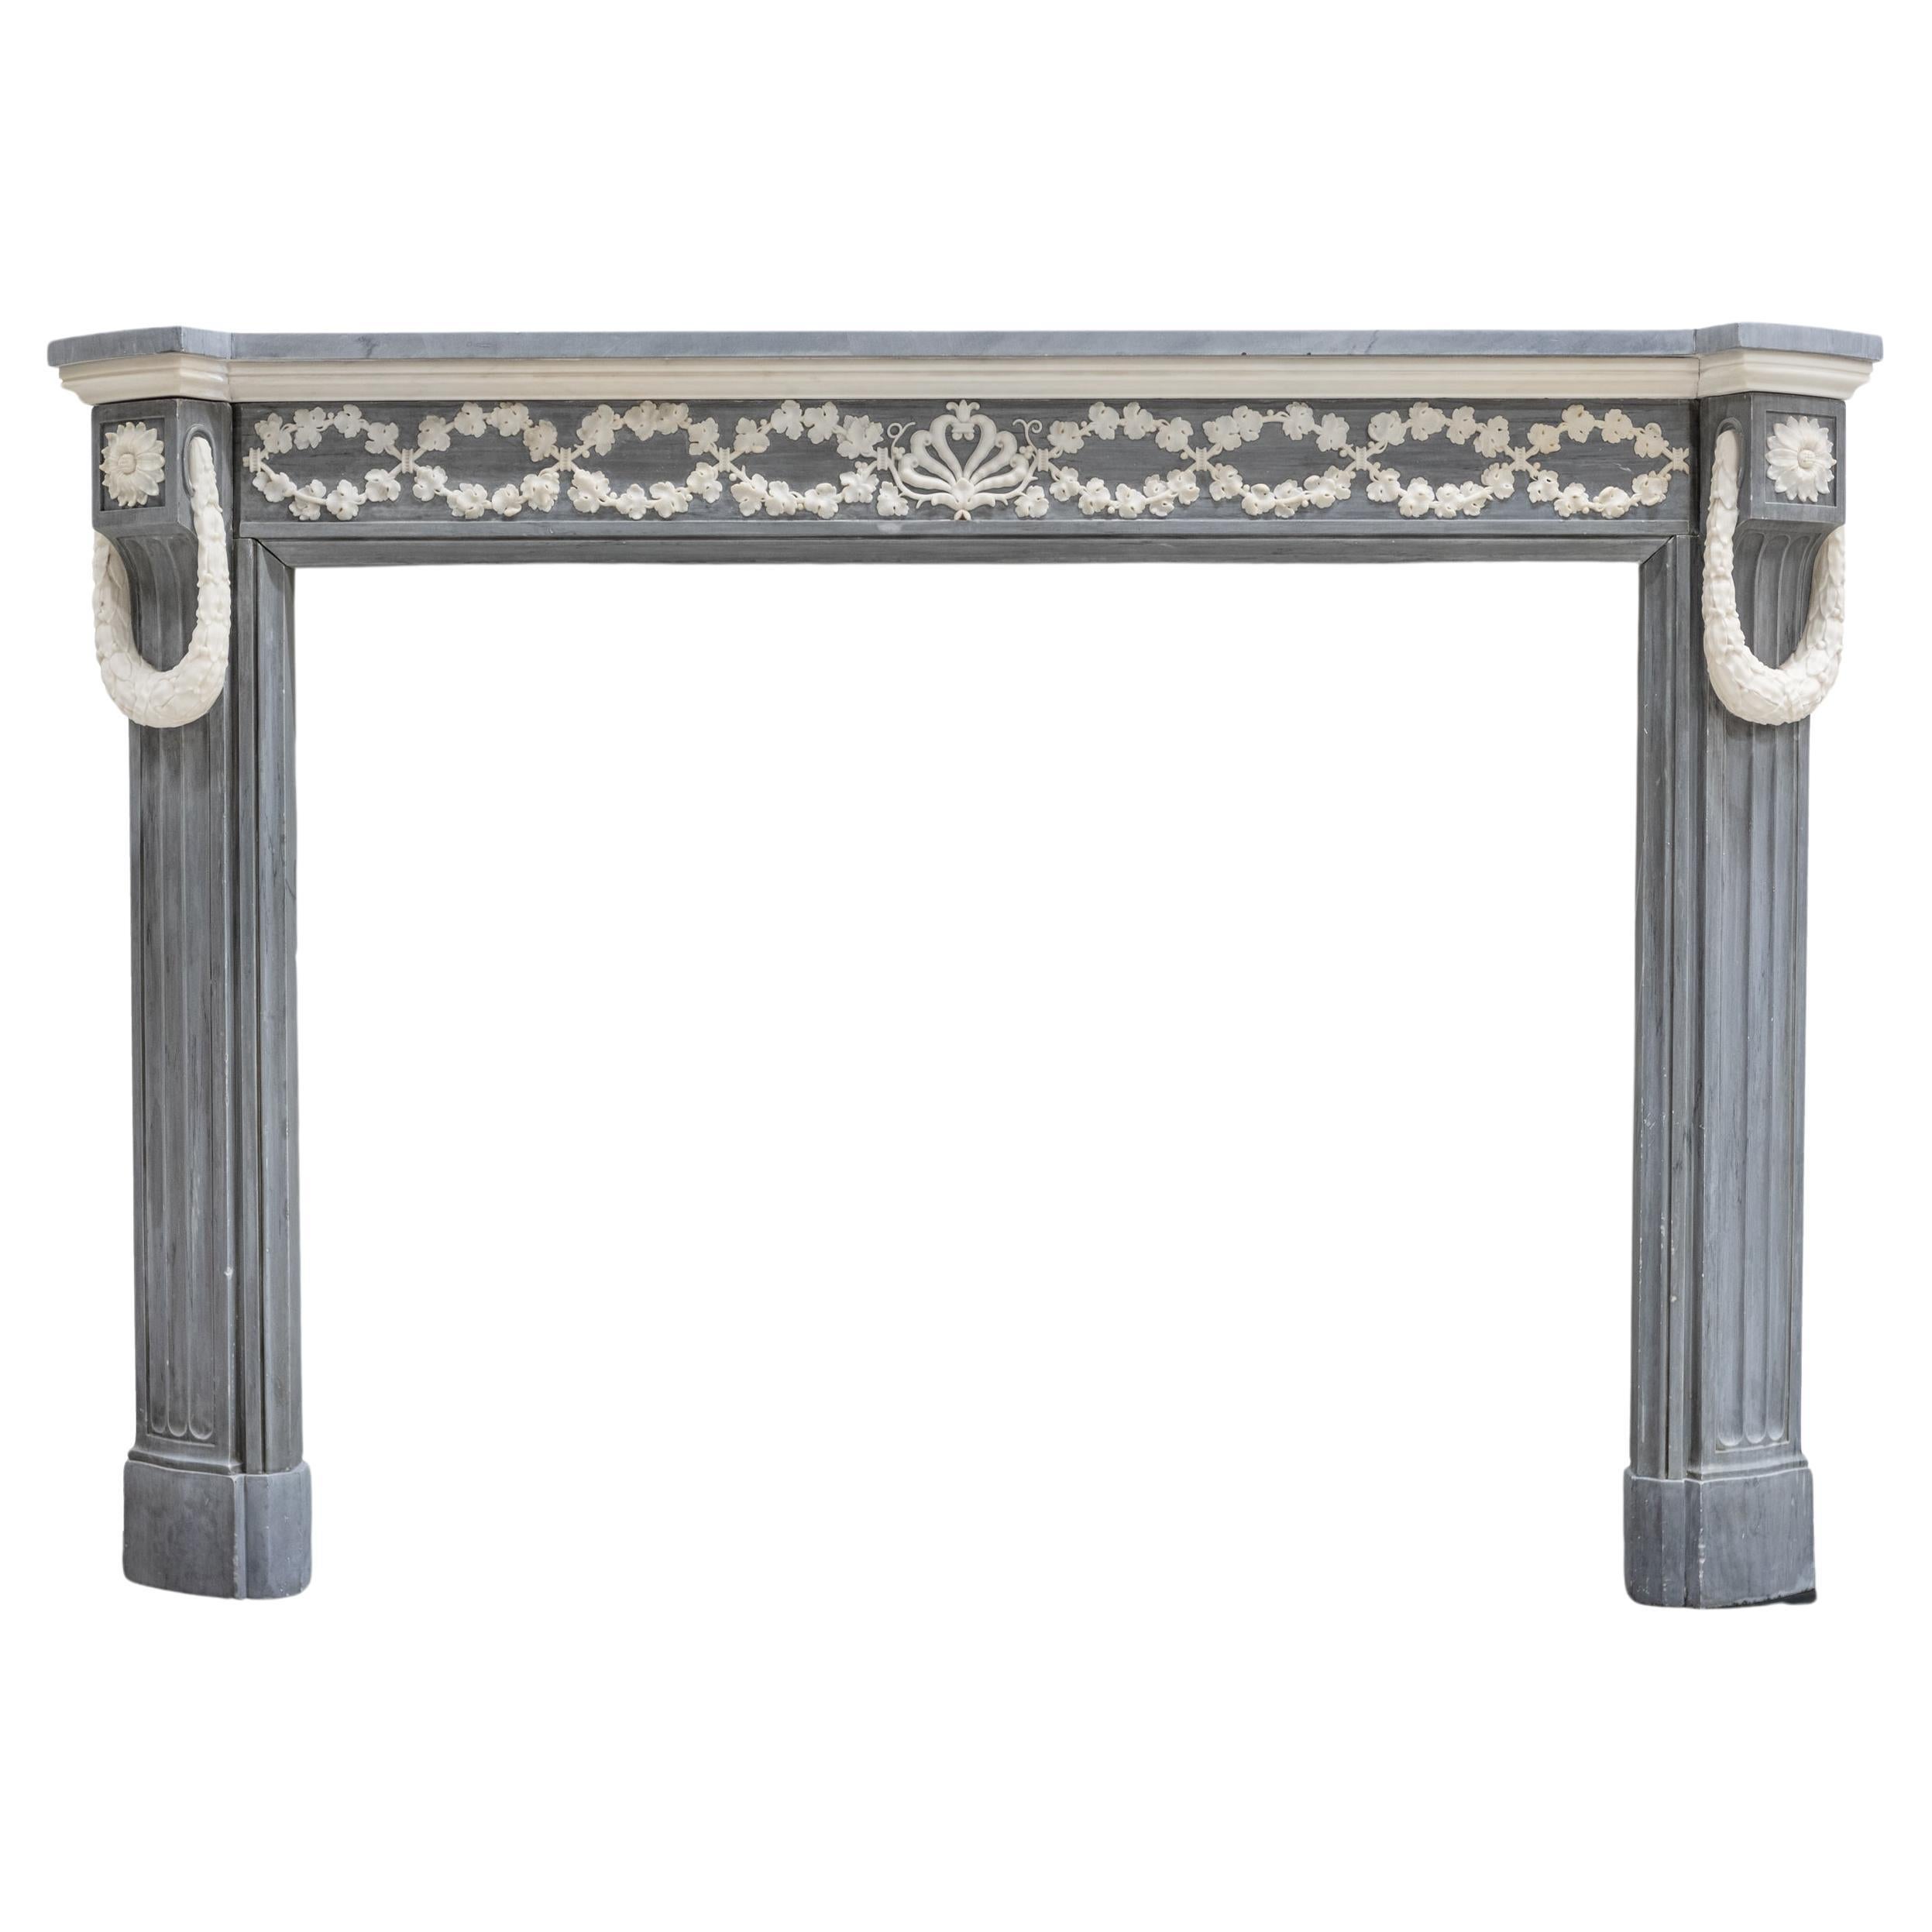 Antique Early 19th Century French Style Grey Marble Fireplace Surround